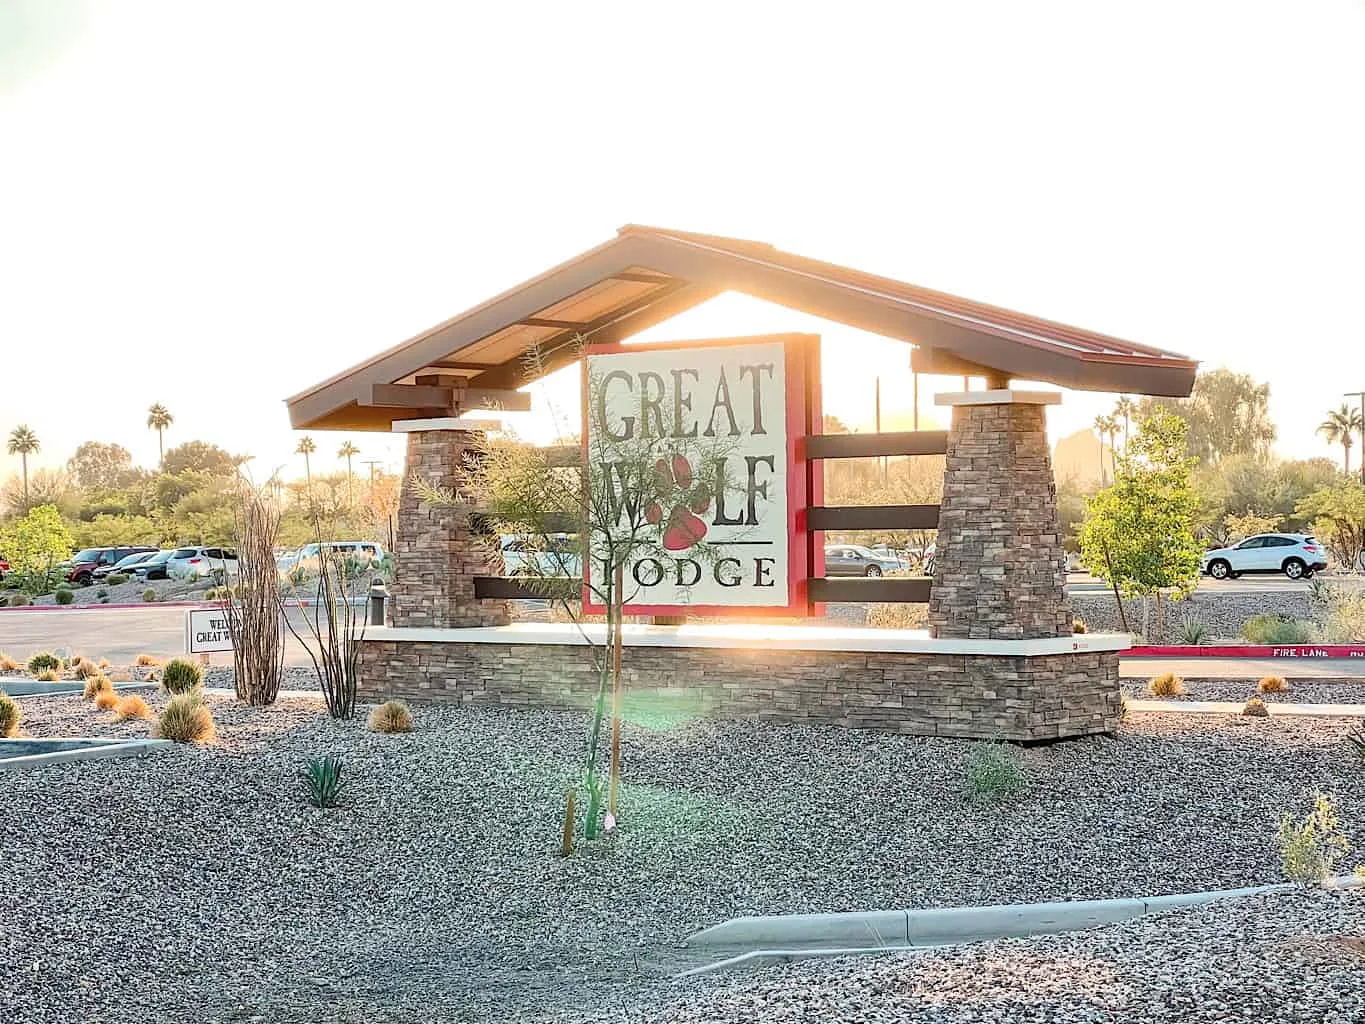 Street sign for Great Wolf Lodge in Arizona